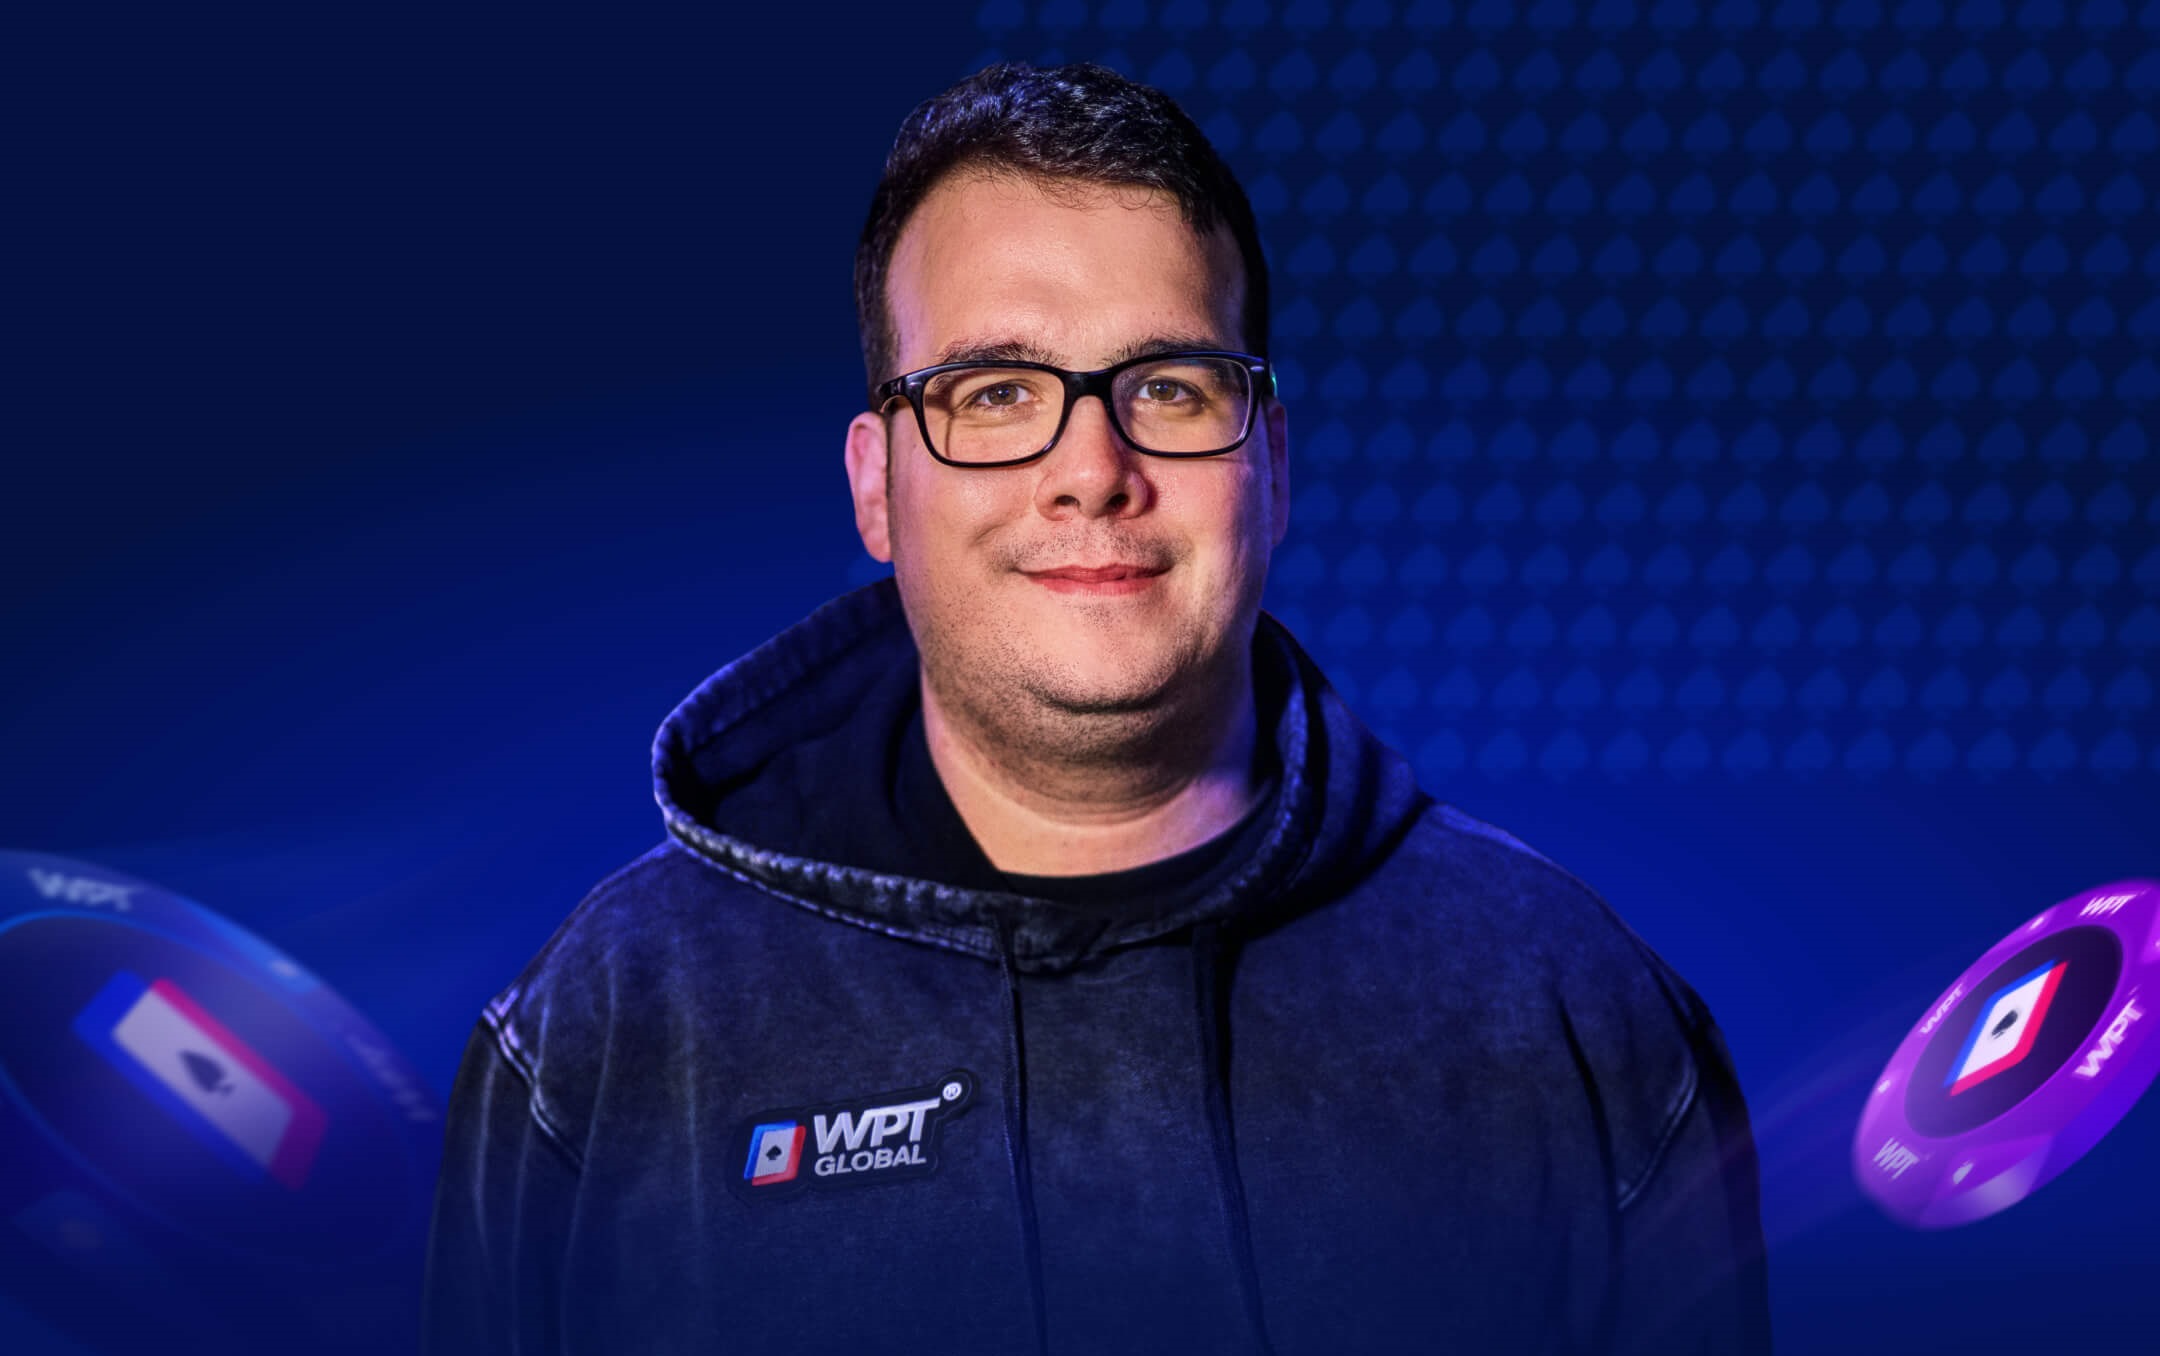 WPT Global Adds Streamer Extraordinaire Patrick ‘Egption’ Tardif to Its Roster